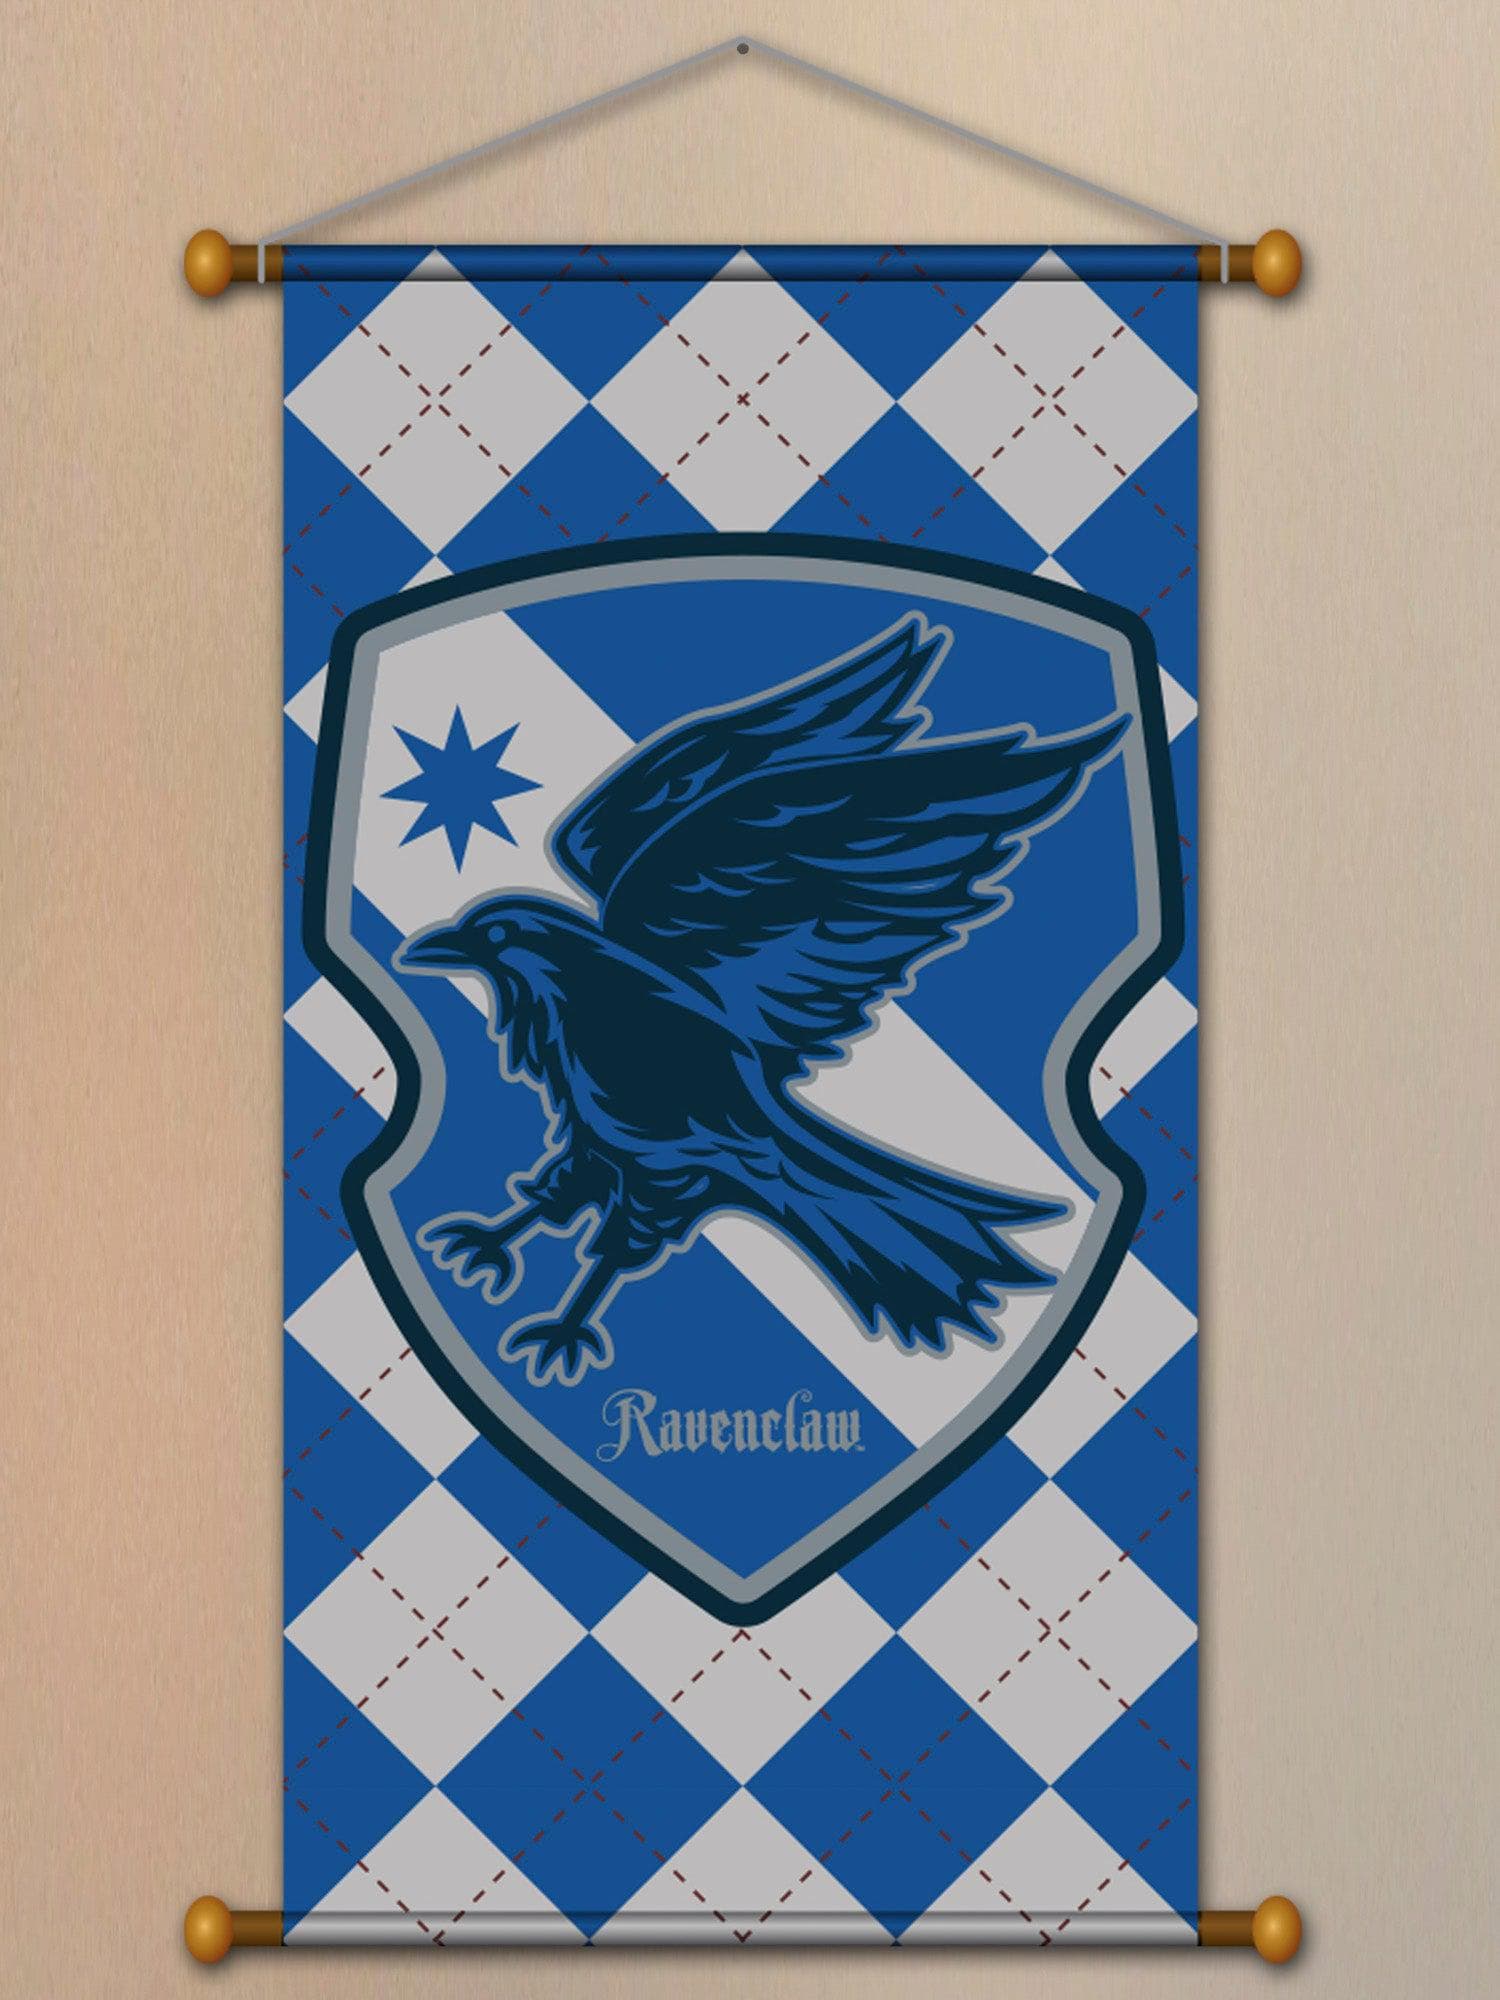 33-inch Harry Potter Ravenclaw House Banner - costumes.com